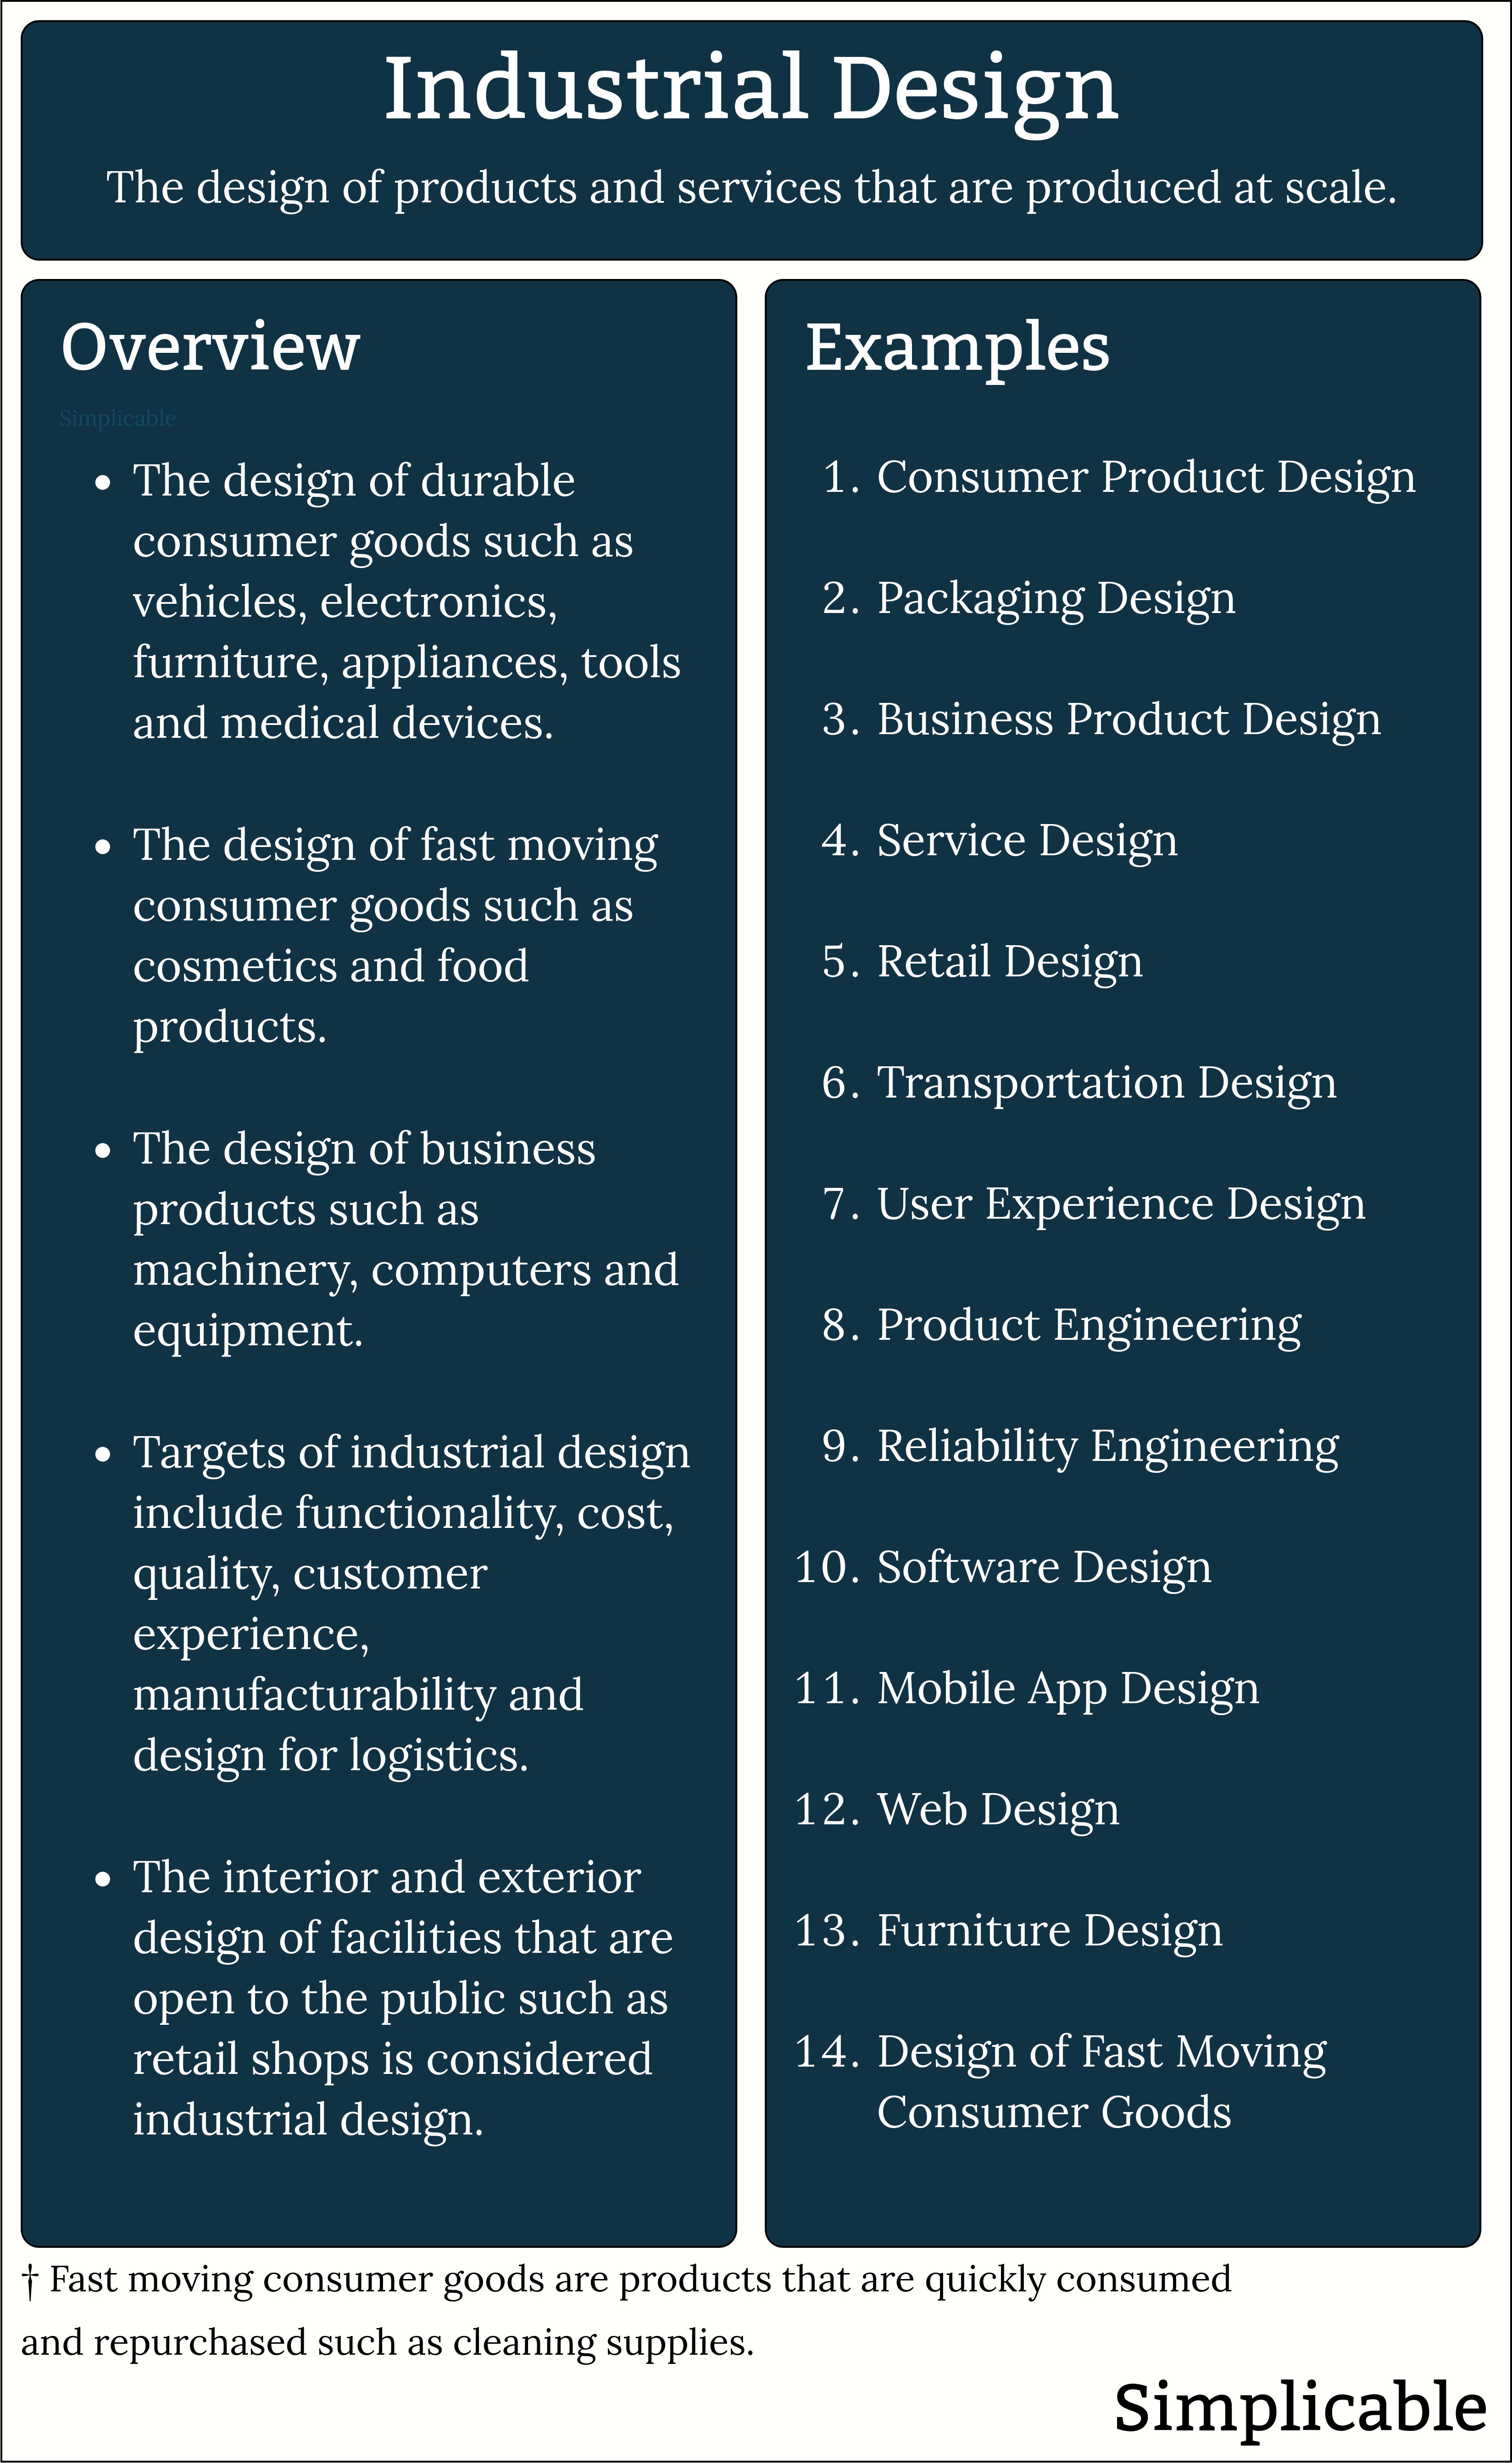 industrial design definition and overview